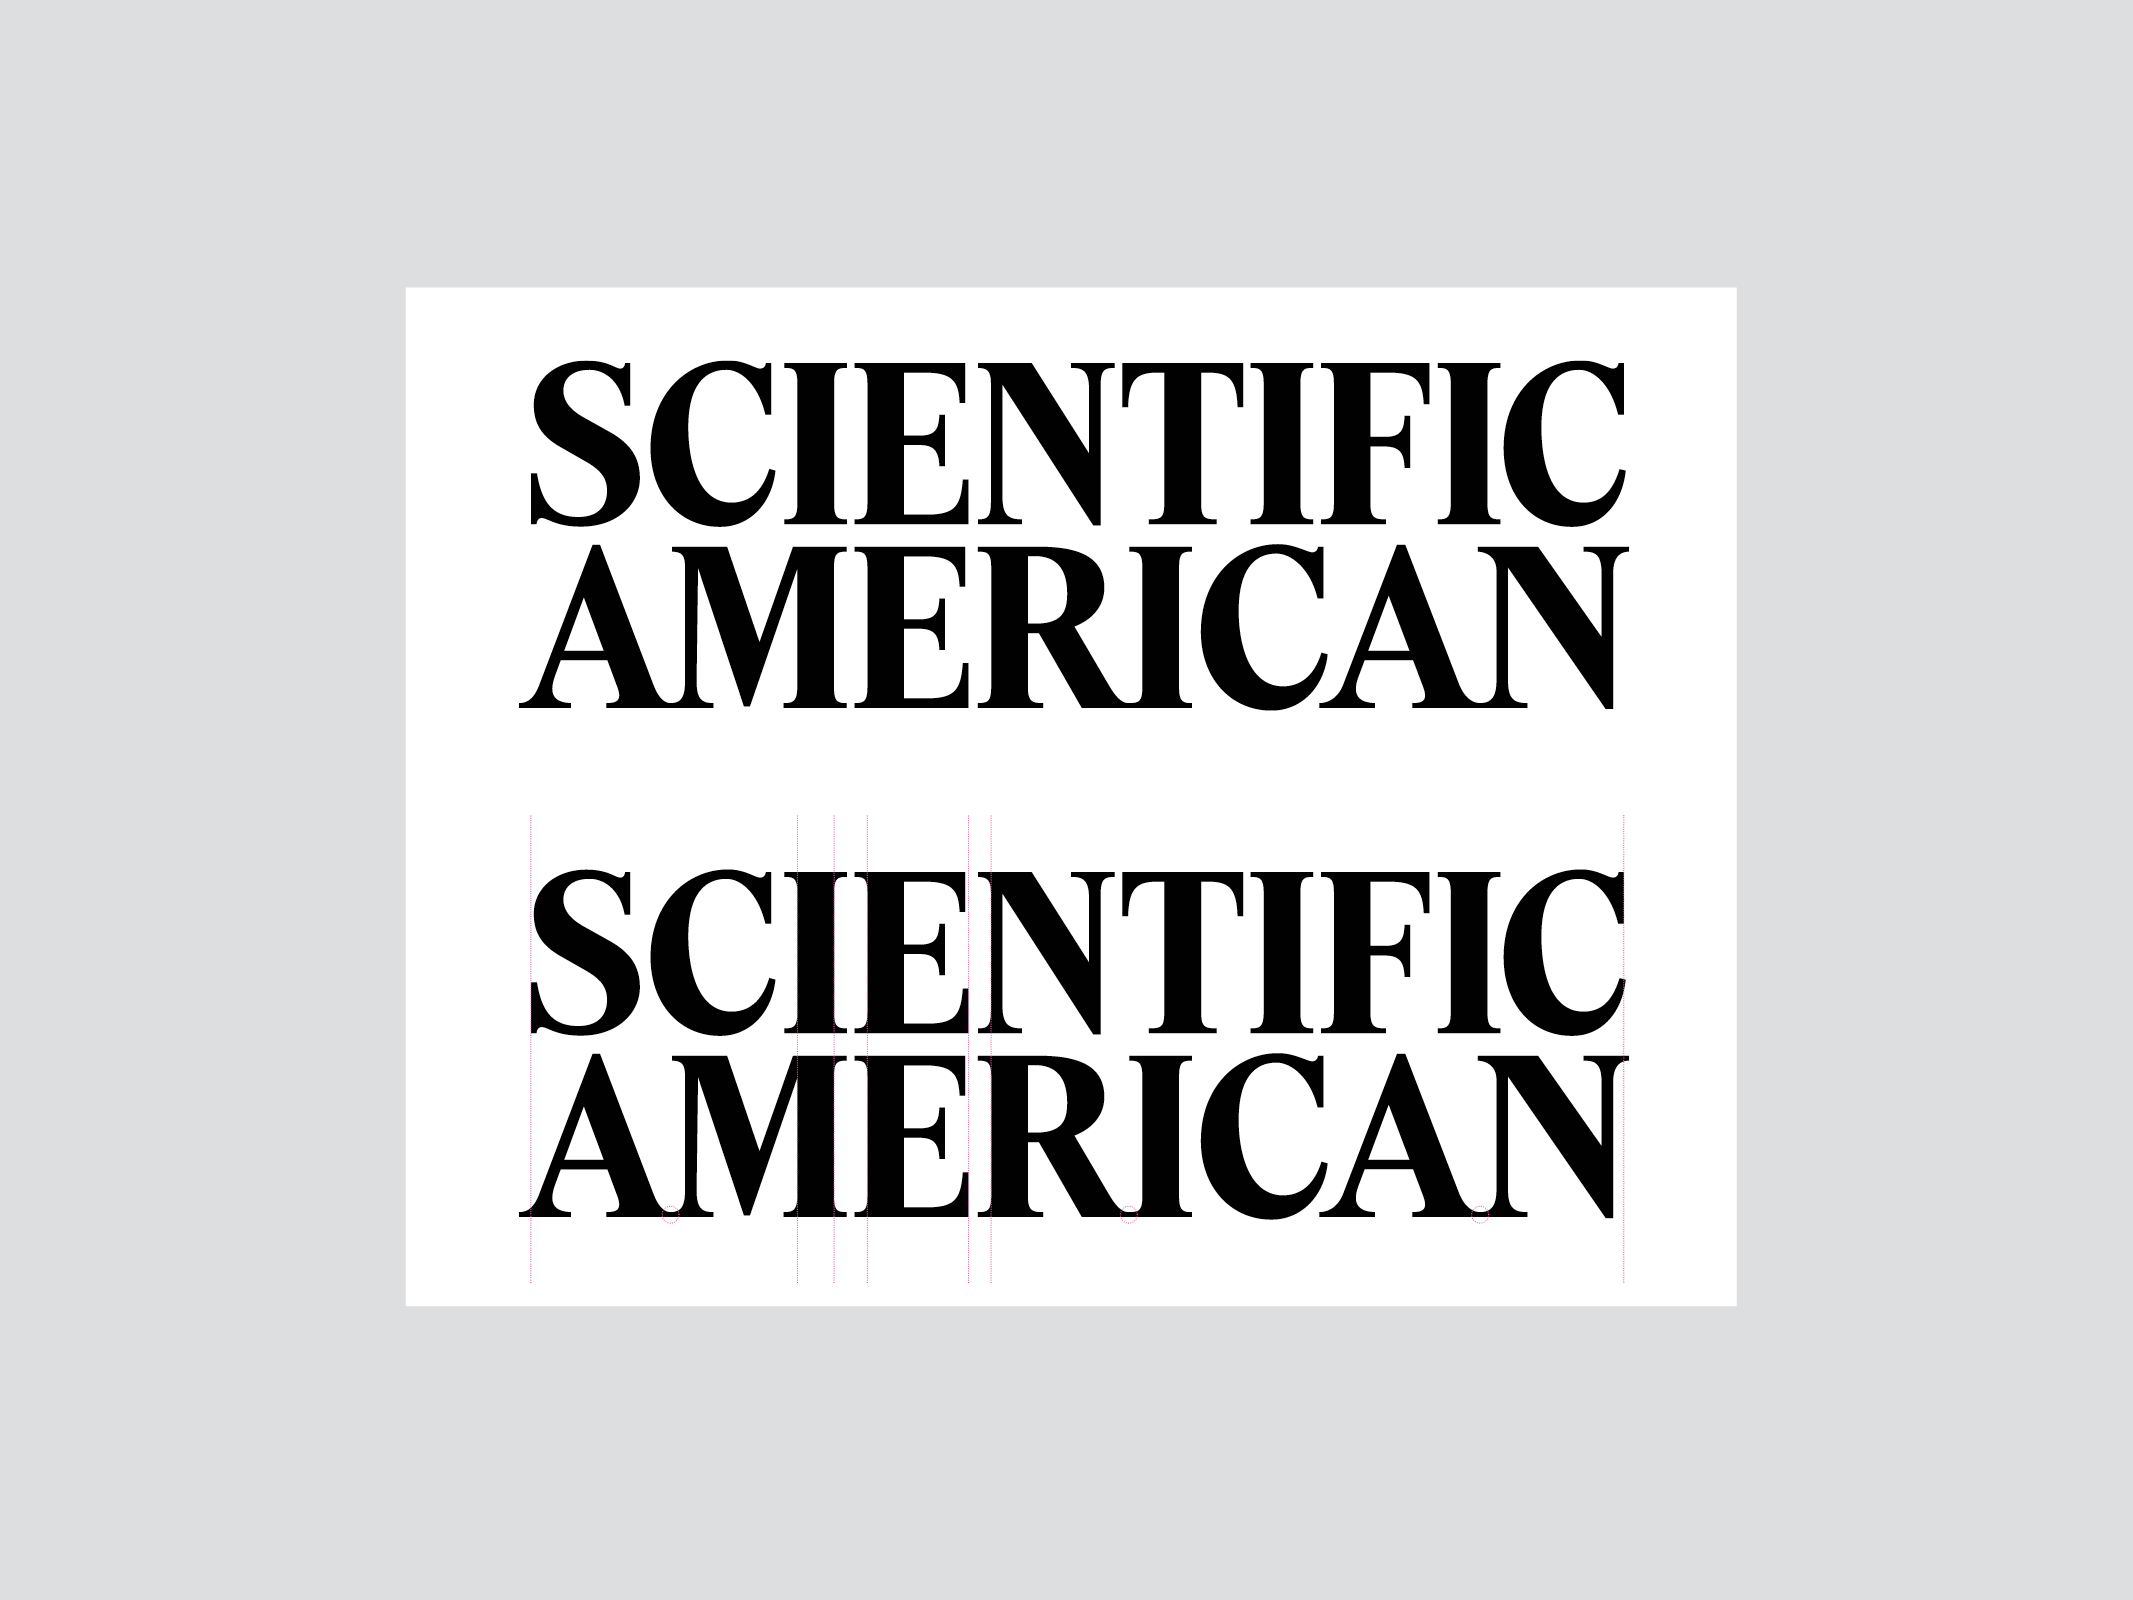 Two of Scientific American's new logos.